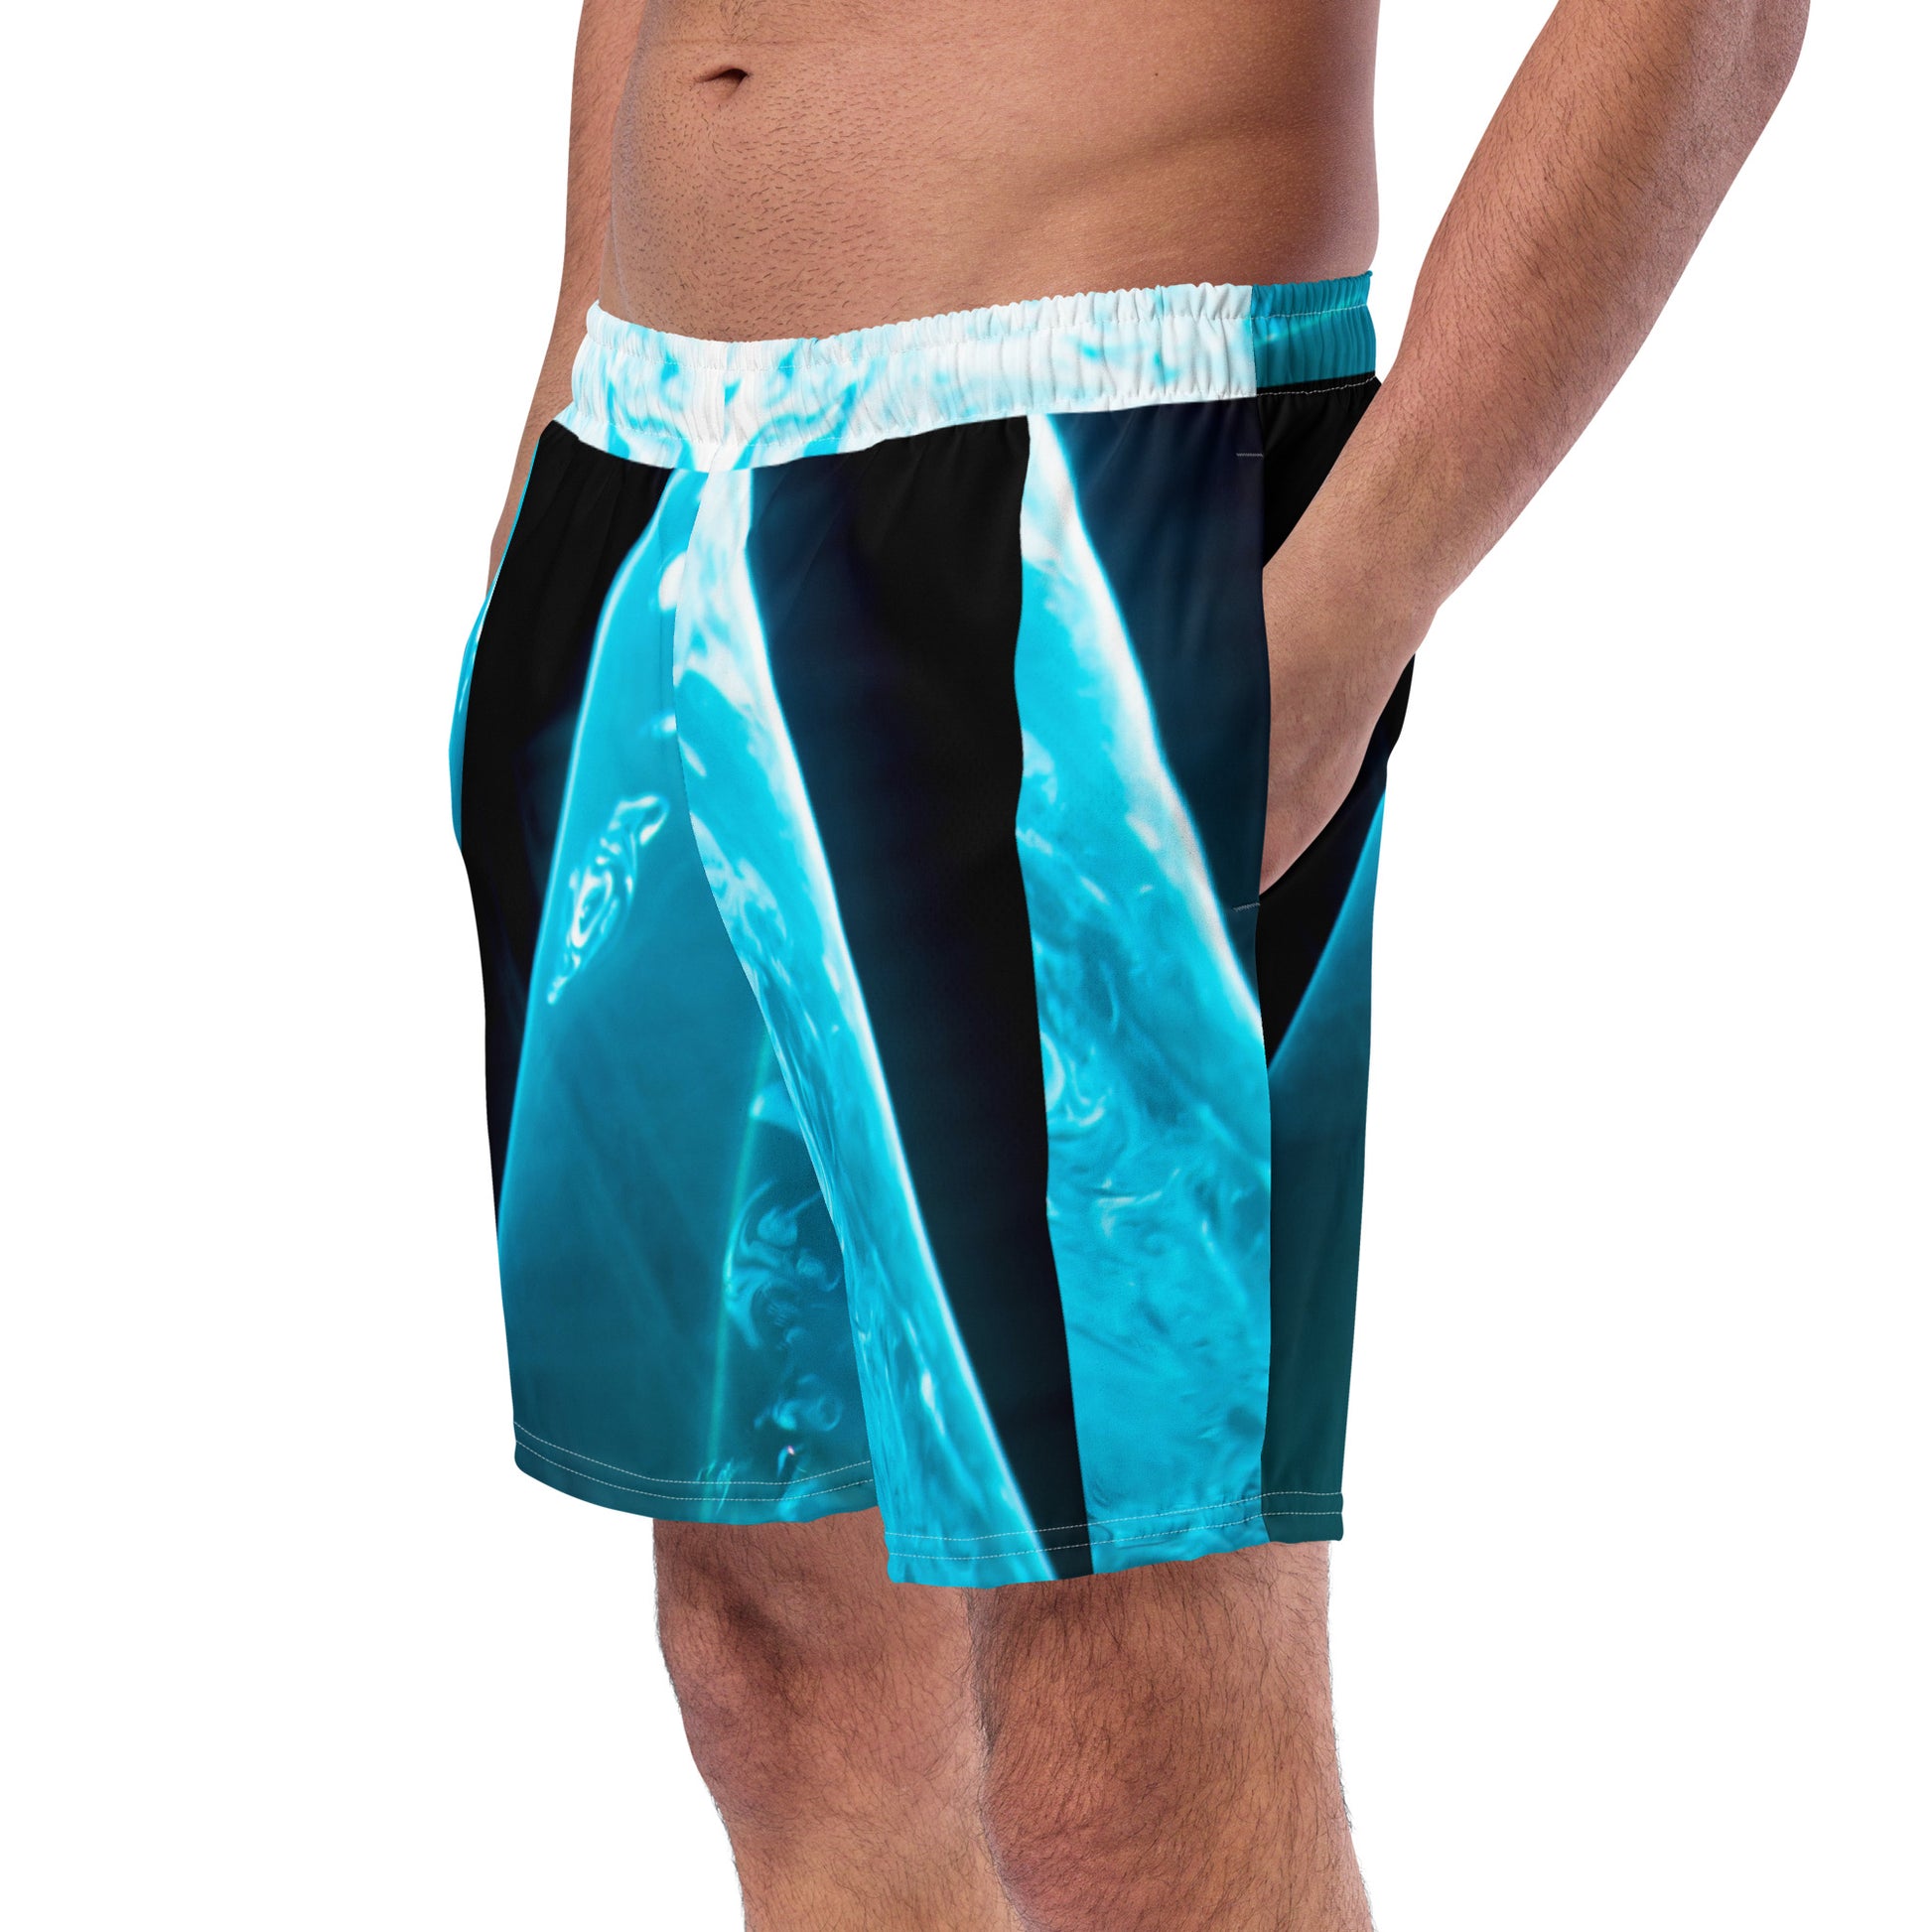 Men's Aqua Spotlight Swim Trunks will give you just the experience you need to see yourself in the spotlight and look good while doing so!